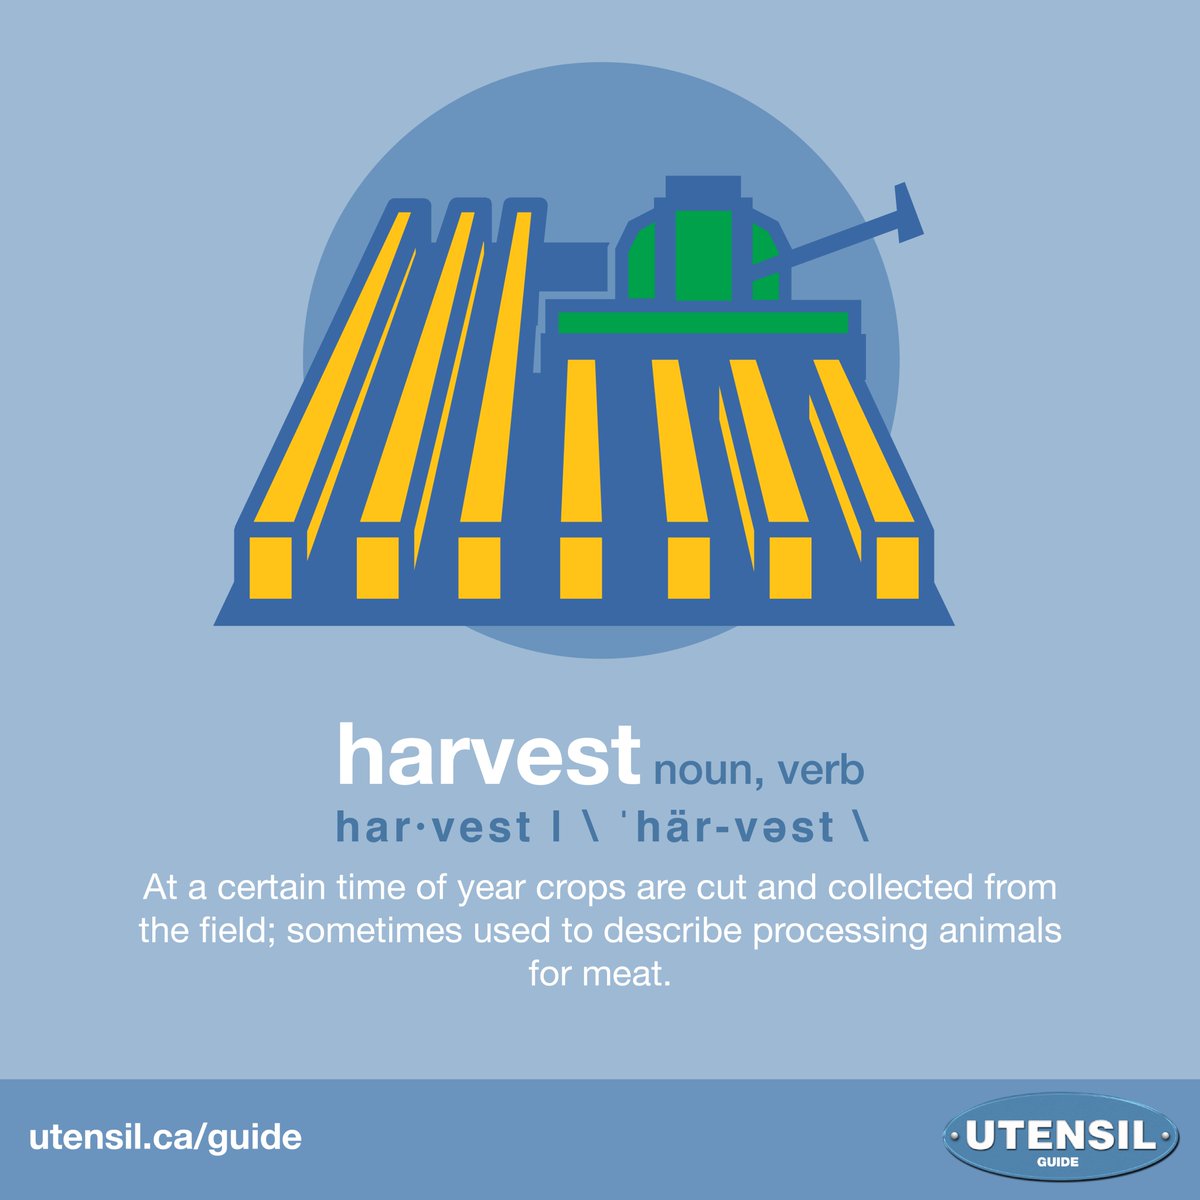 HARVEST (noun, verb) At a certain time of year crops are cut and collected from the field; sometimes used to describe the processing of animals for meat. #UtensilGuide #CdnAg #CdnFood Learn more food & farming terms at: utensil.ca/guide